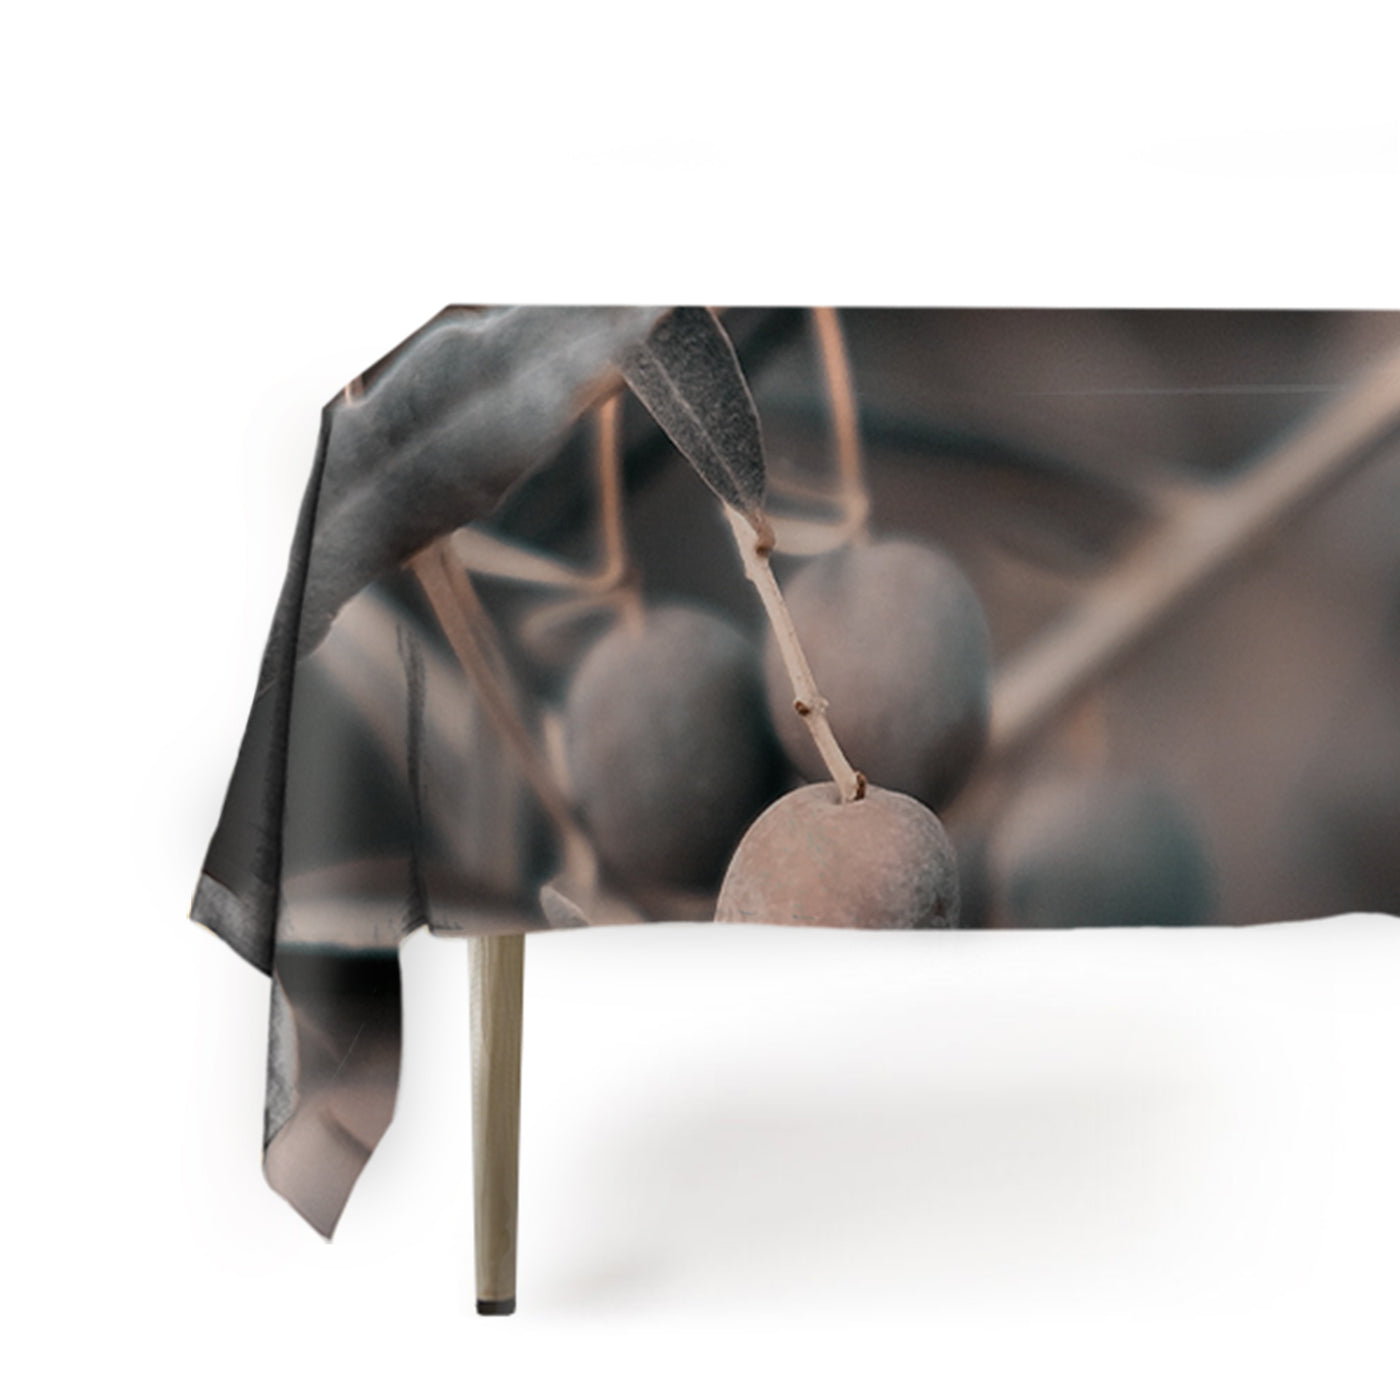 LUXE TABLECLOTH - Autumn Olives